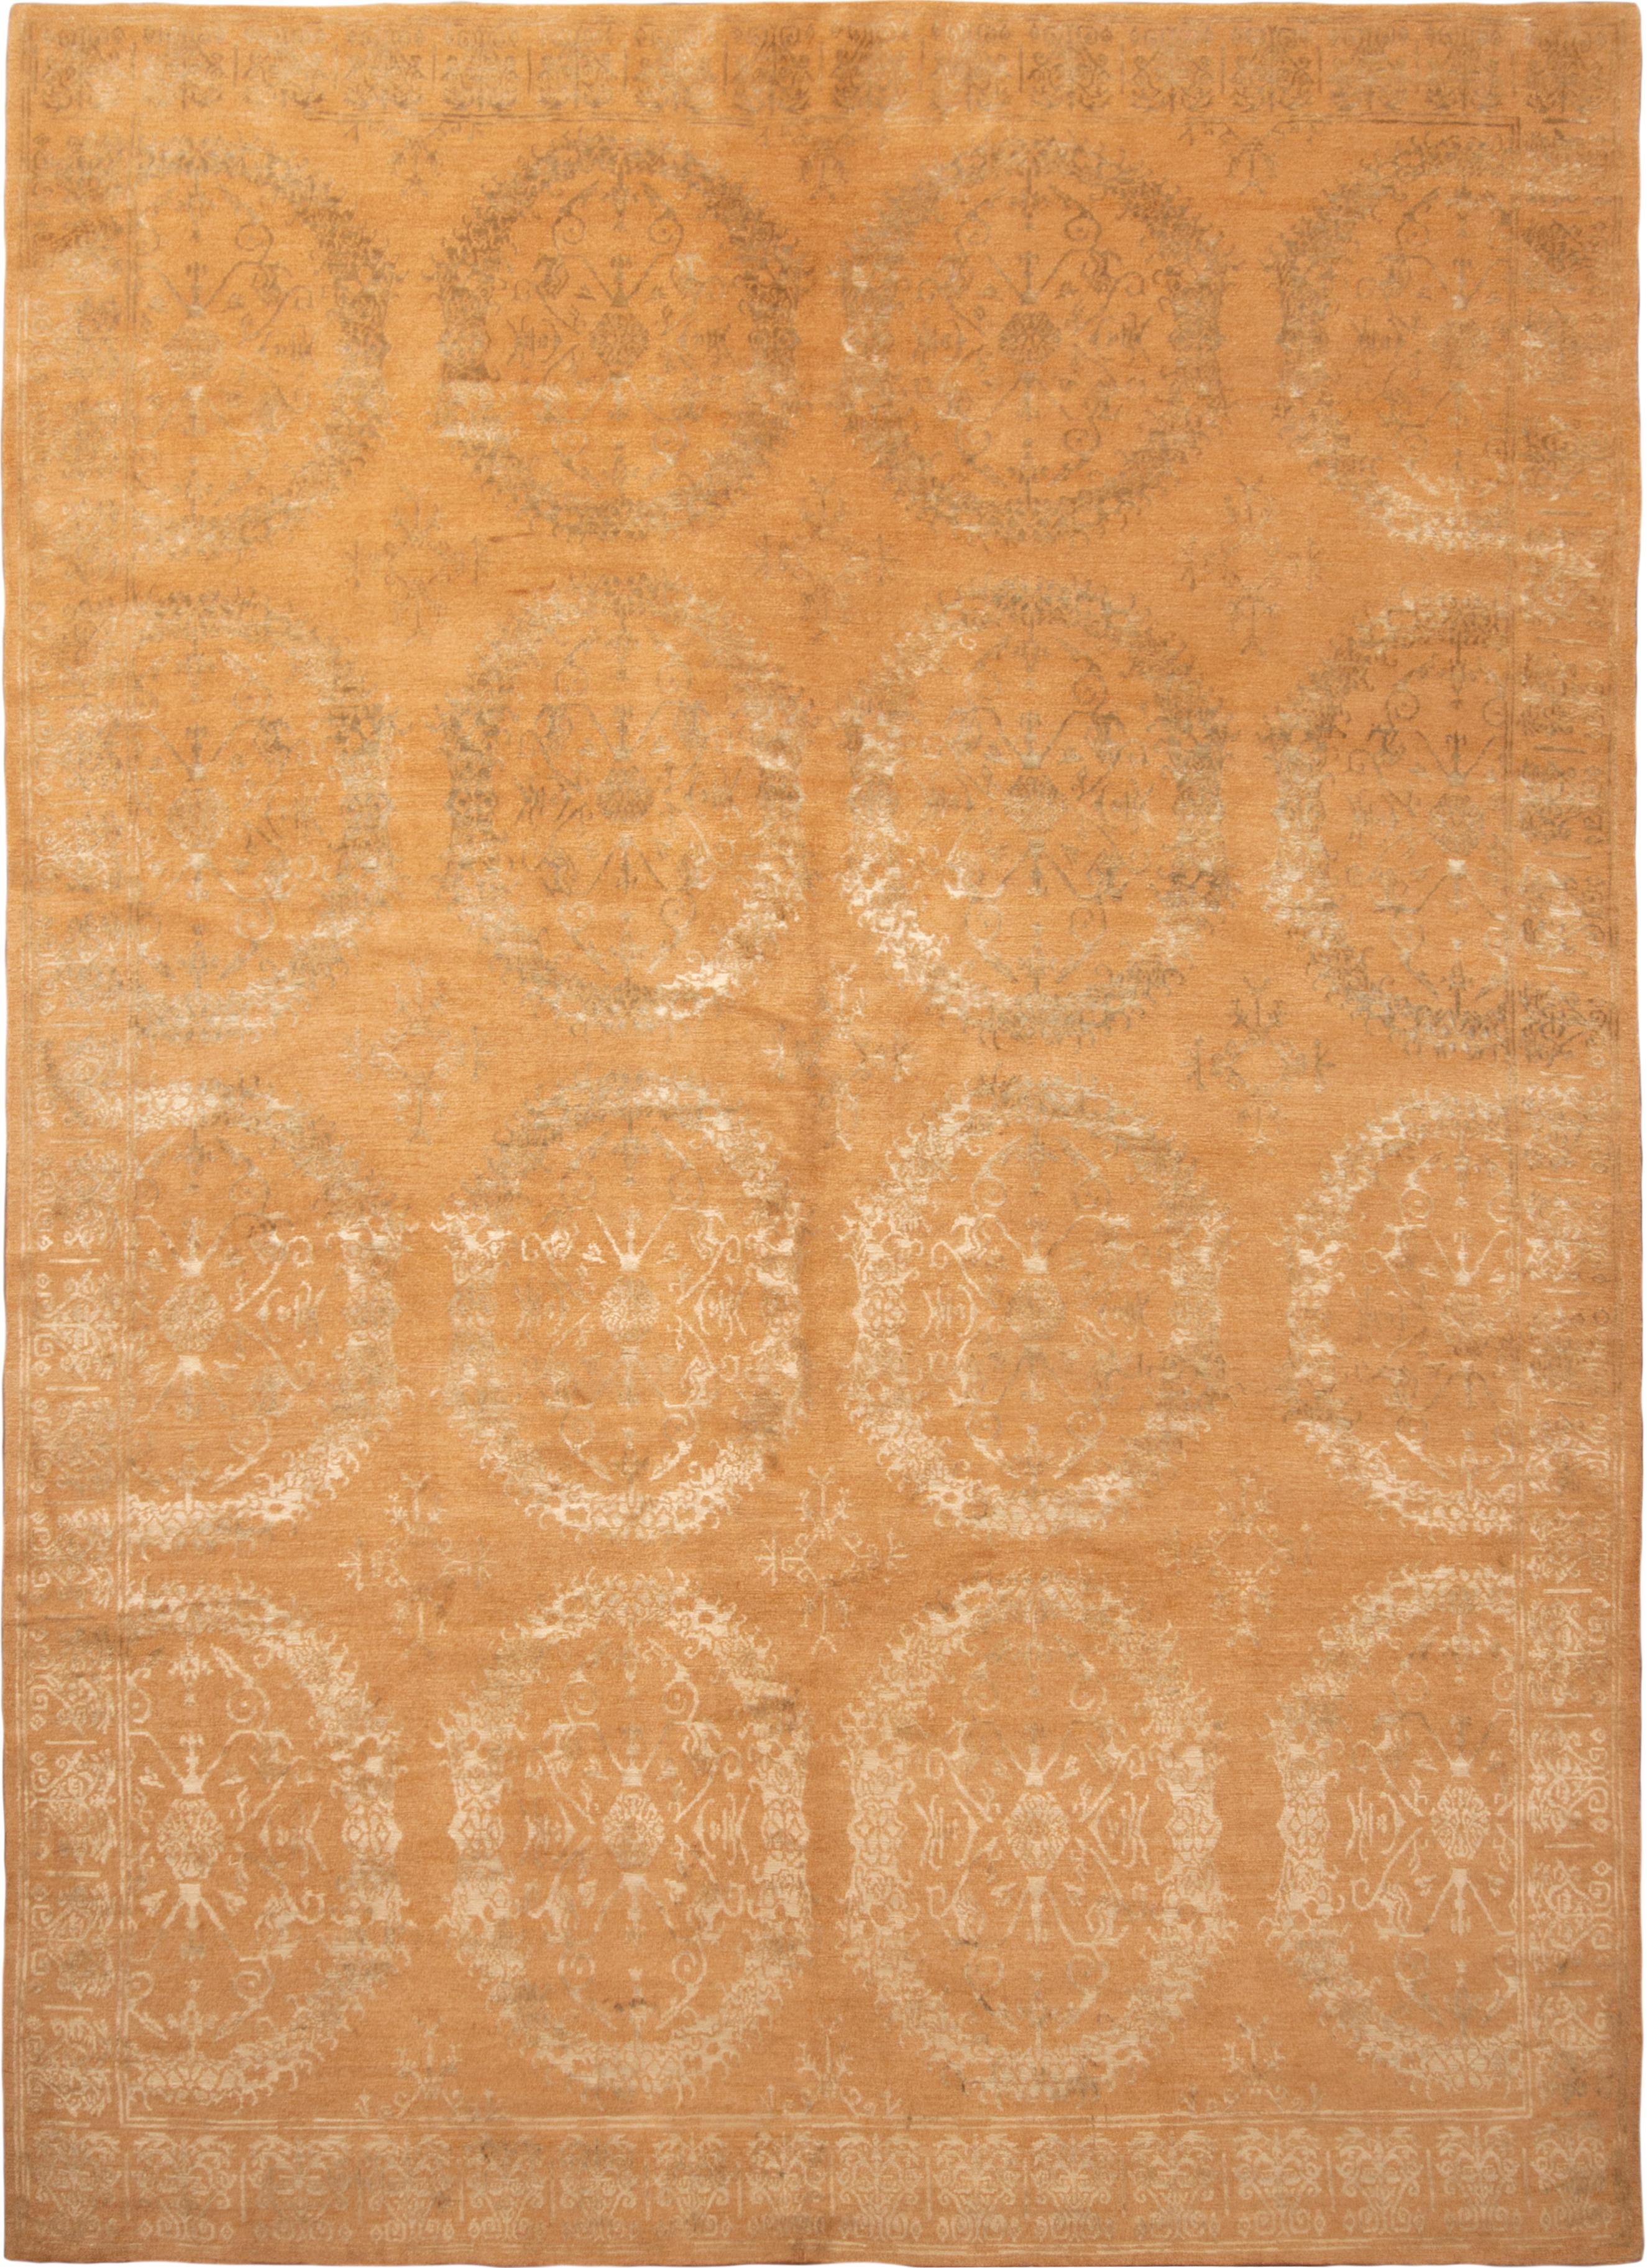 Inspired by an 18th century Spanish pattern, this modern wool and silk rug features a Catana design, characterized an uncommon combination of large scale repetition and unique border. Hand knotted in high quality wool and naturally shining silk, the